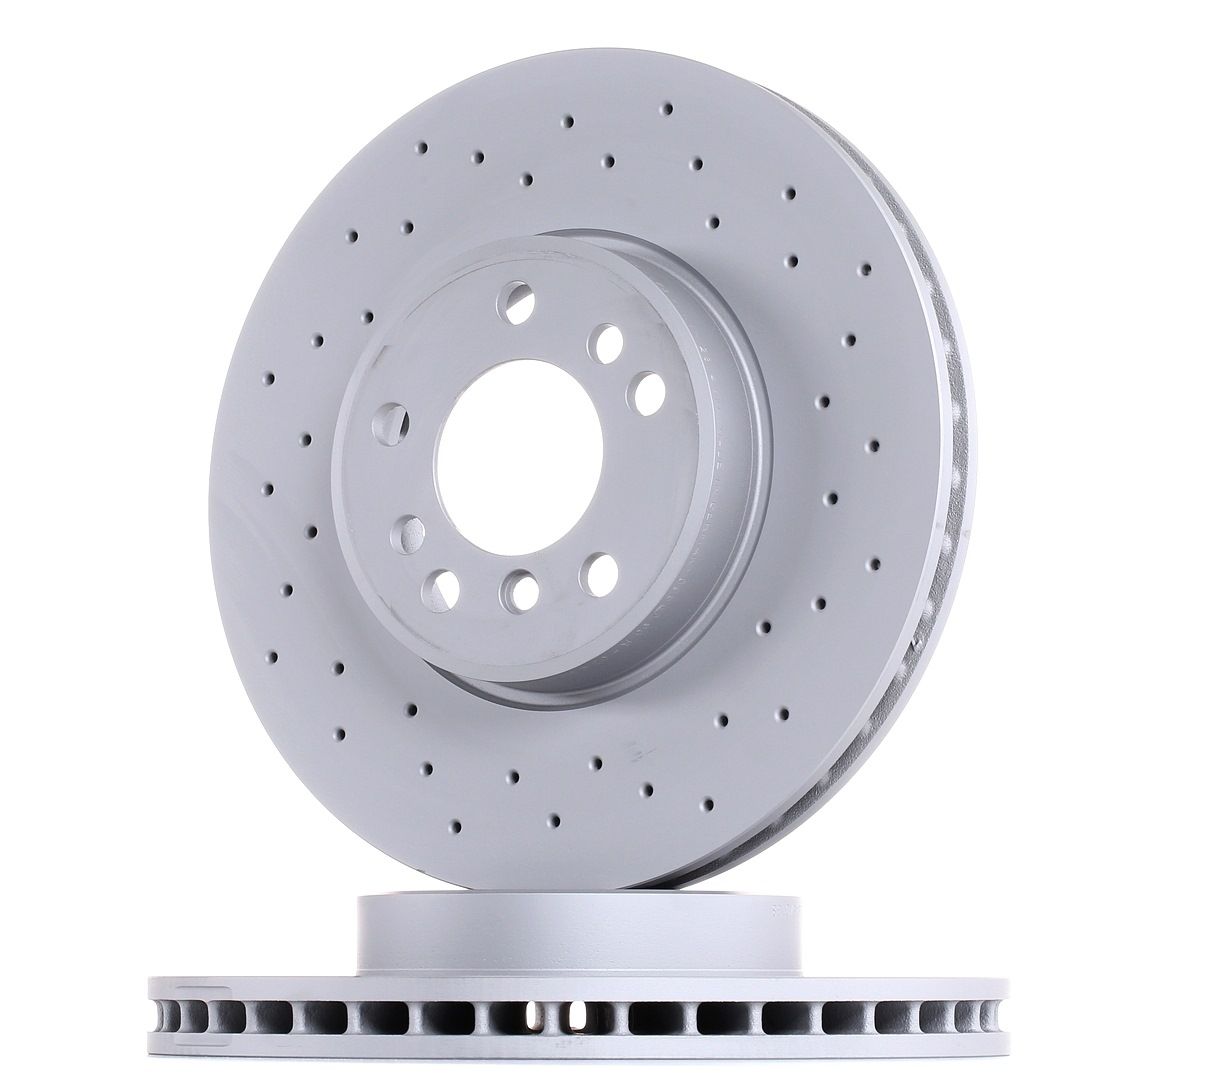 ZIMMERMANN SPORT COAT Z 150.1298.52 Brake disc 332x30mm, 6/5, 5x120, internally vented, Perforated, Coated, High-carbon